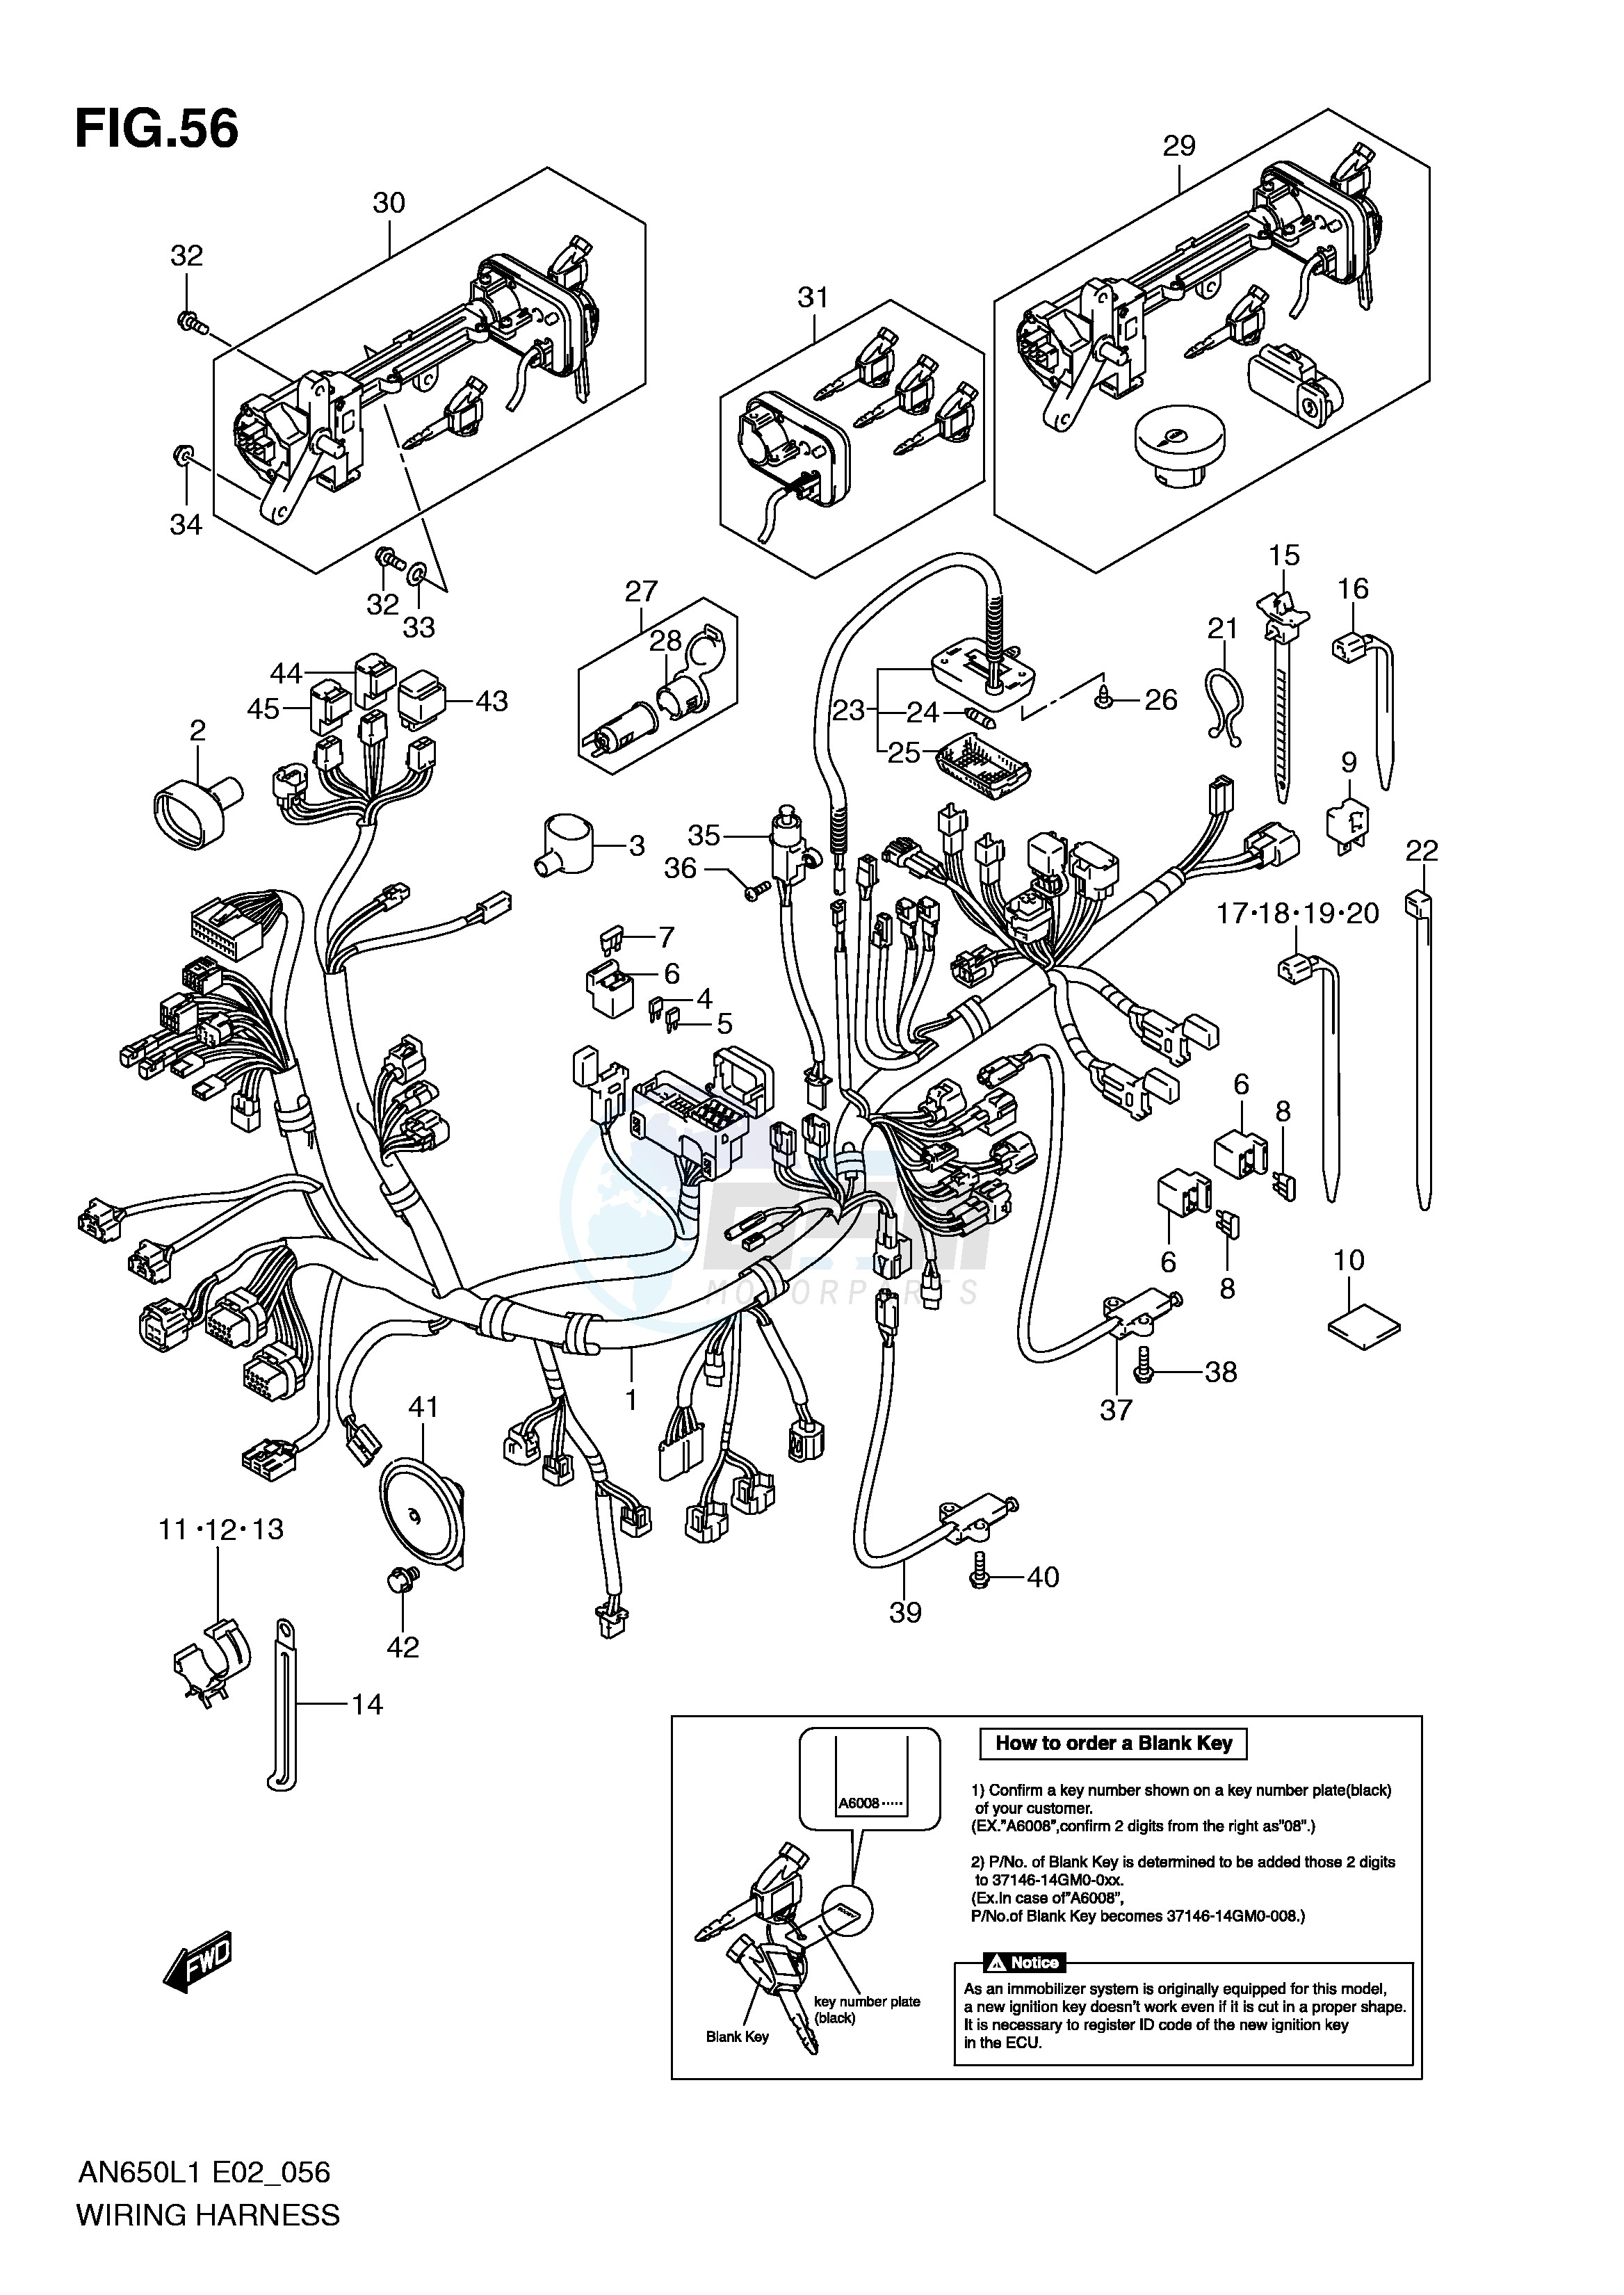 WIRING HARNESS (AN650L1 E19) image